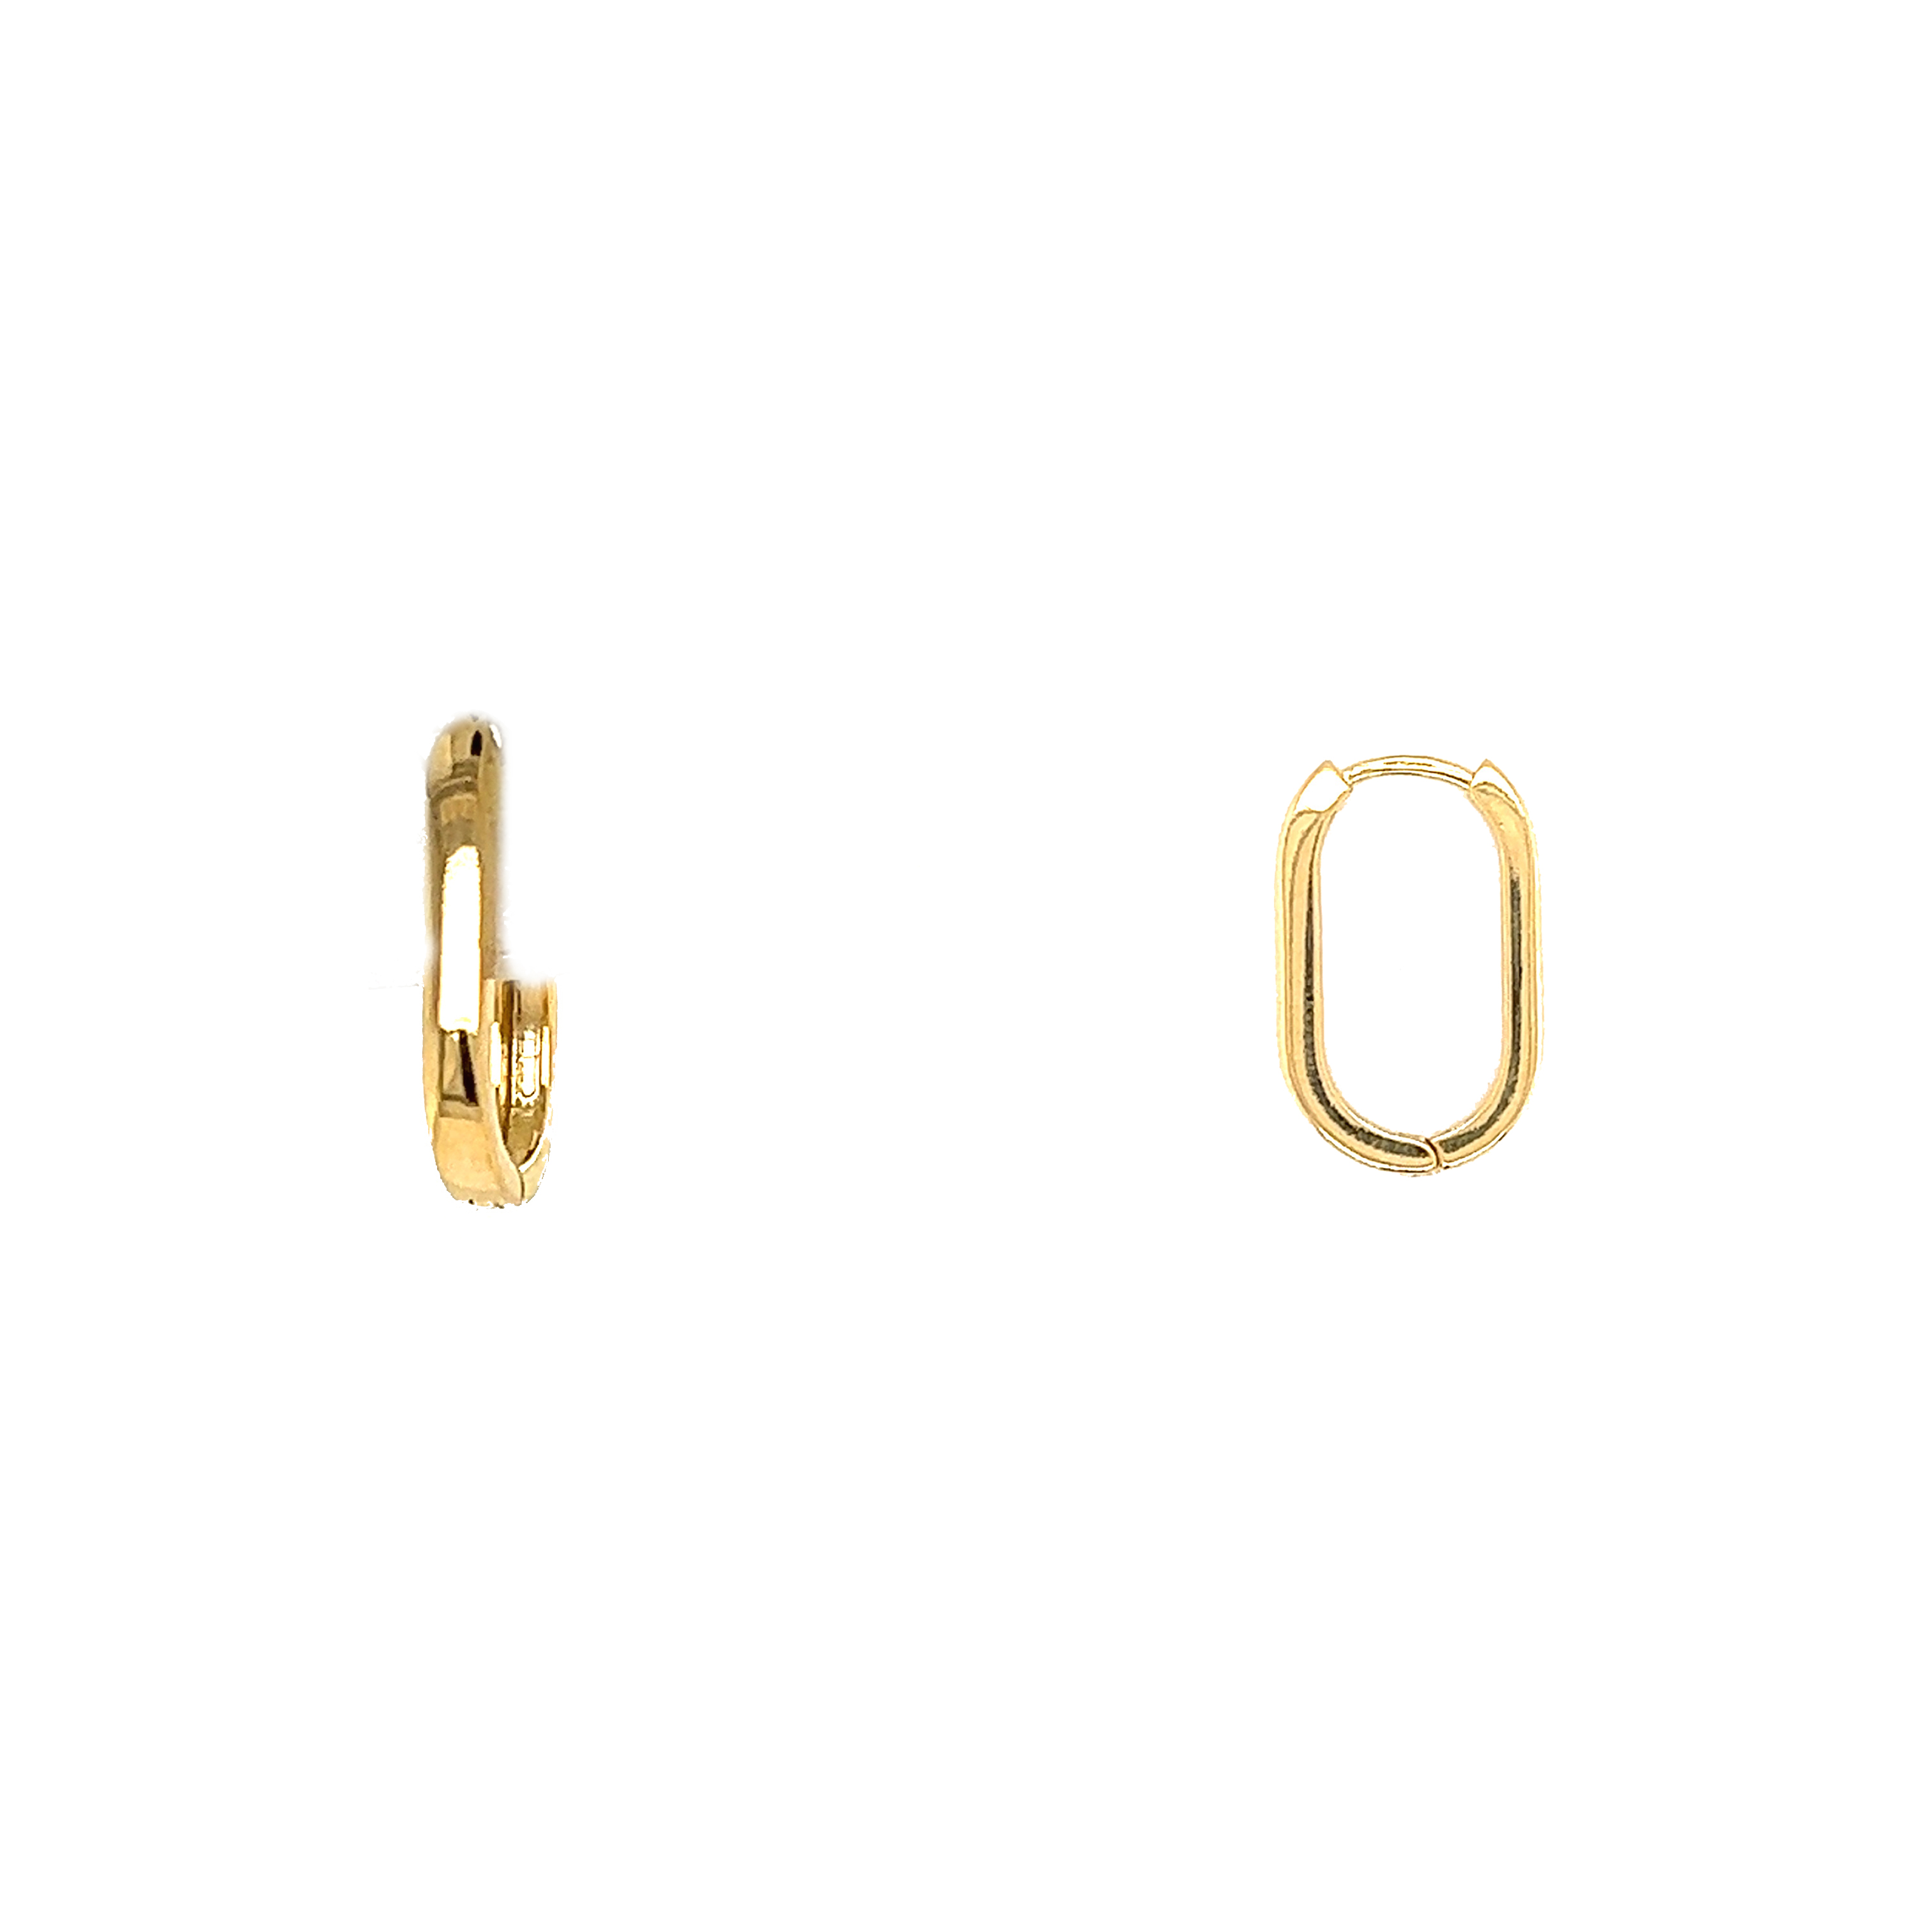 2.5mm x 15mm Gold Filled Hoops